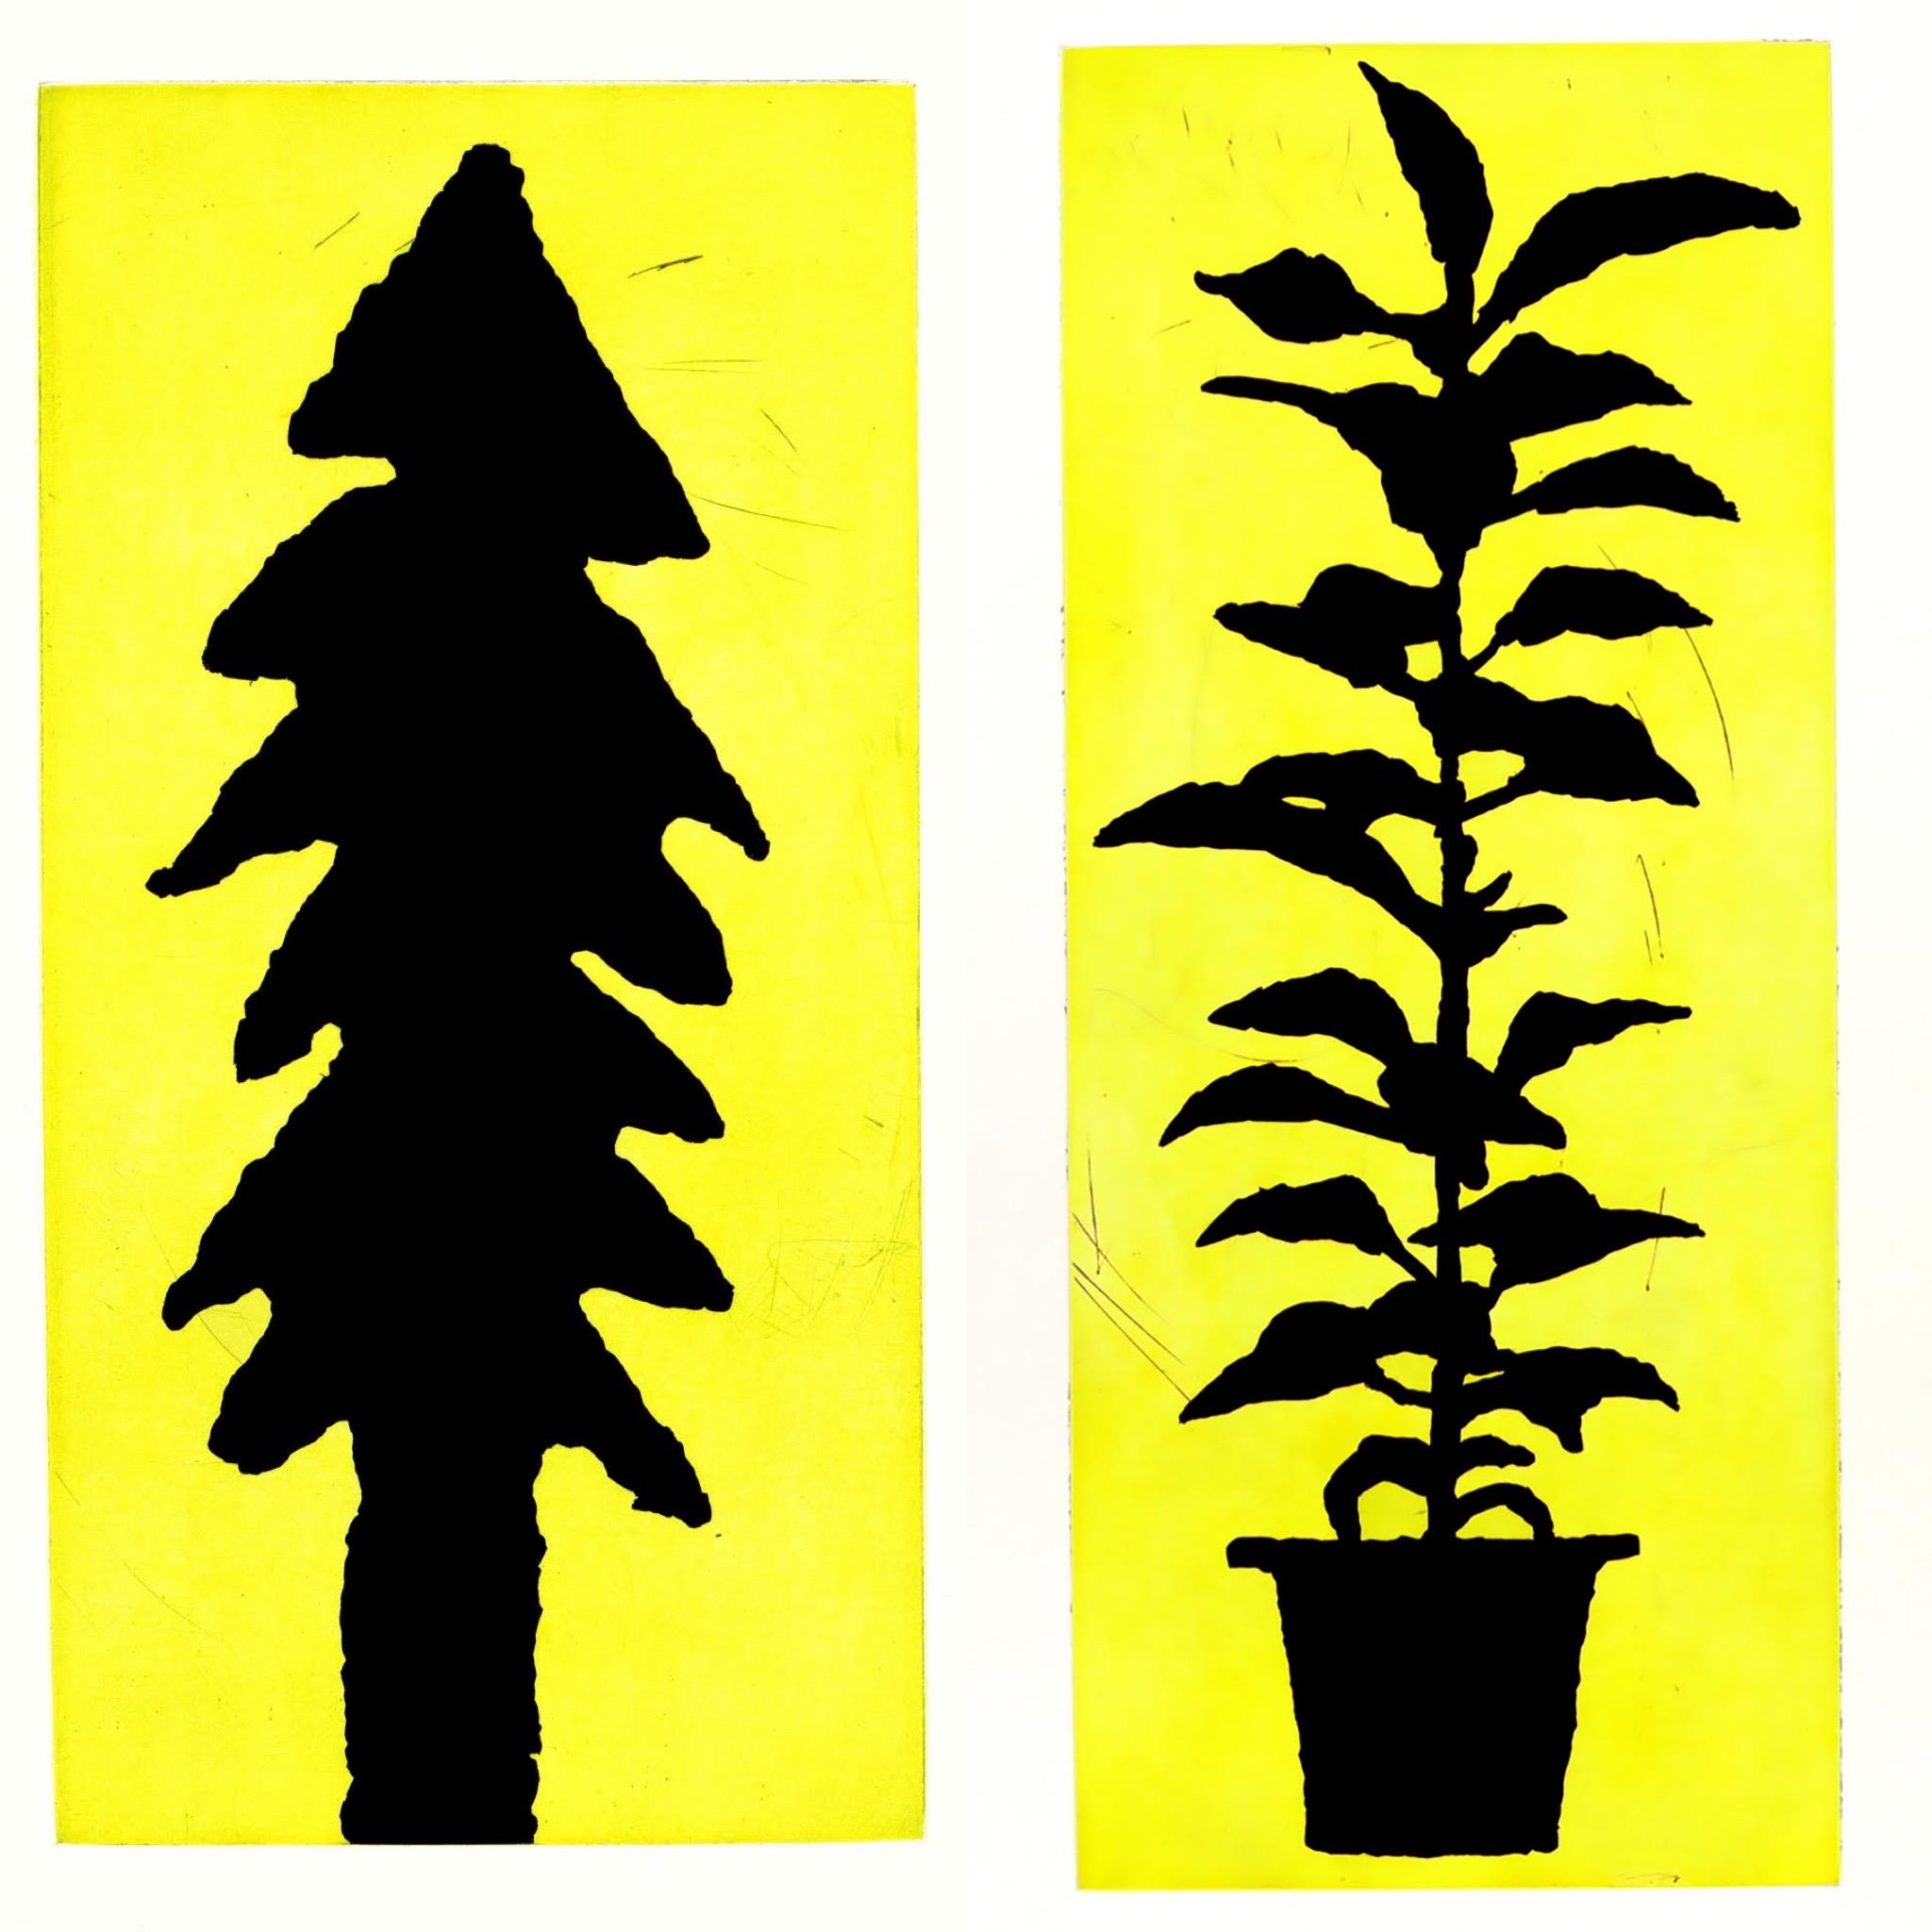 Donald Baechler 2005: a set of 2 works:
A set of two highly decorative signed limited edition Donald Baechler prints sure to standout in any setting. Included in the set:

Donald Baechler Blue Spruce 2005:
Aquatint and drypoint, on Somerset